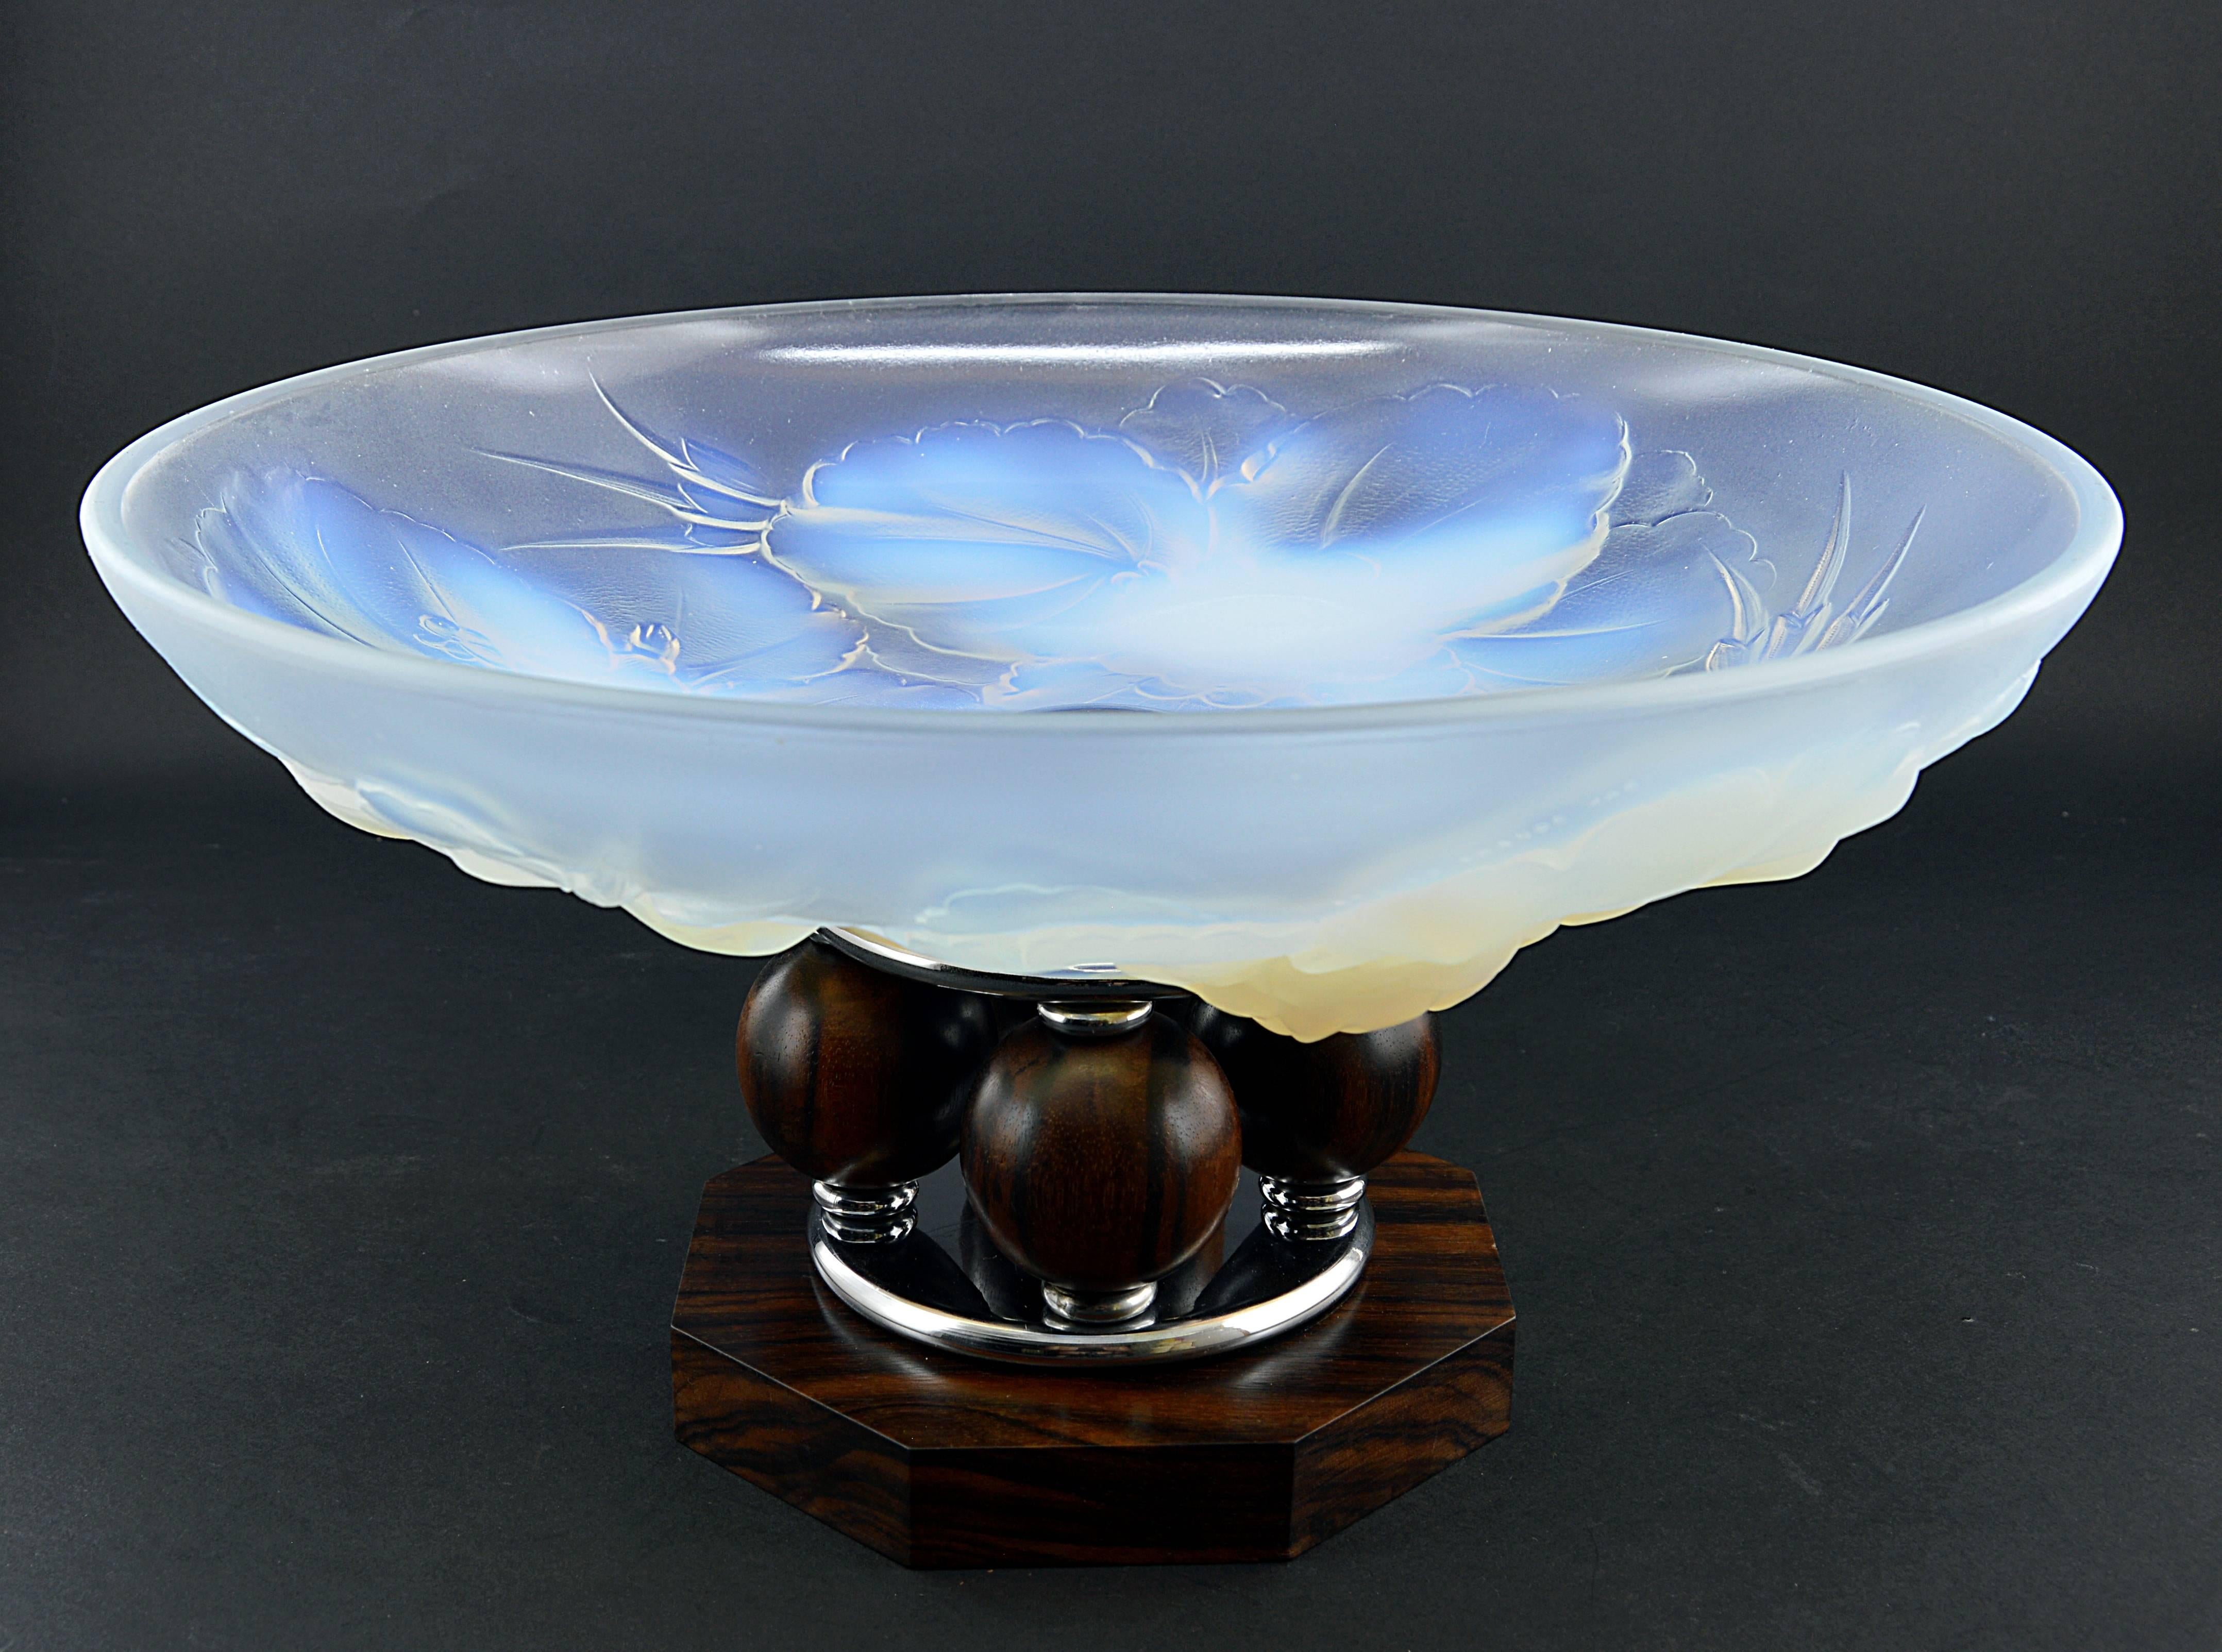 Thick opalescent molded glass bowl on a Macassar ebony and chromed metal base. The famous one with four Macassar balls. Molded signature 